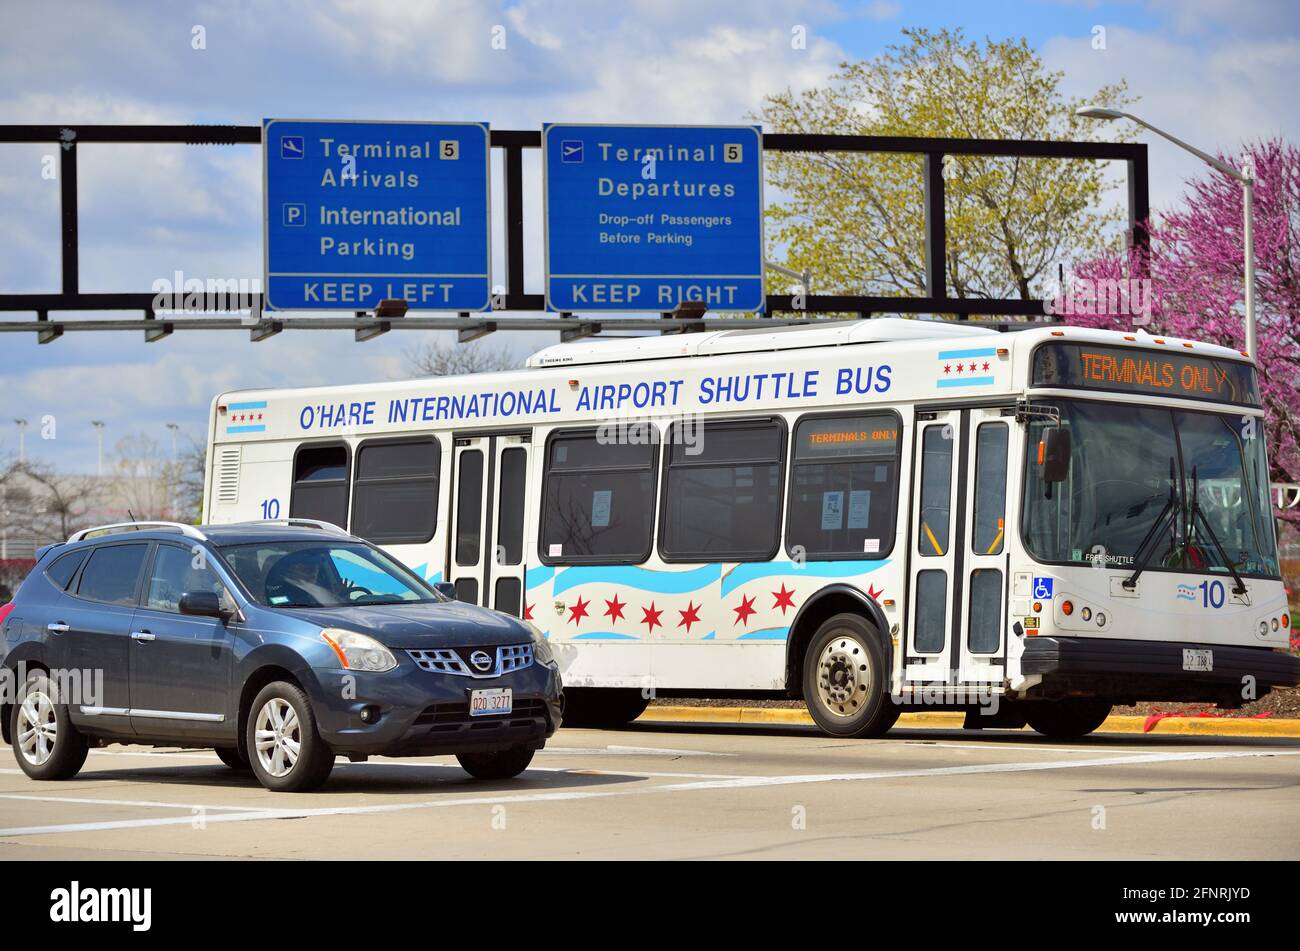 Chicago, Illinois, USA. A shuttle bus in use at O'Hare International Airport. O'Hare is one of the busiest airports in the United States and world. Stock Photo